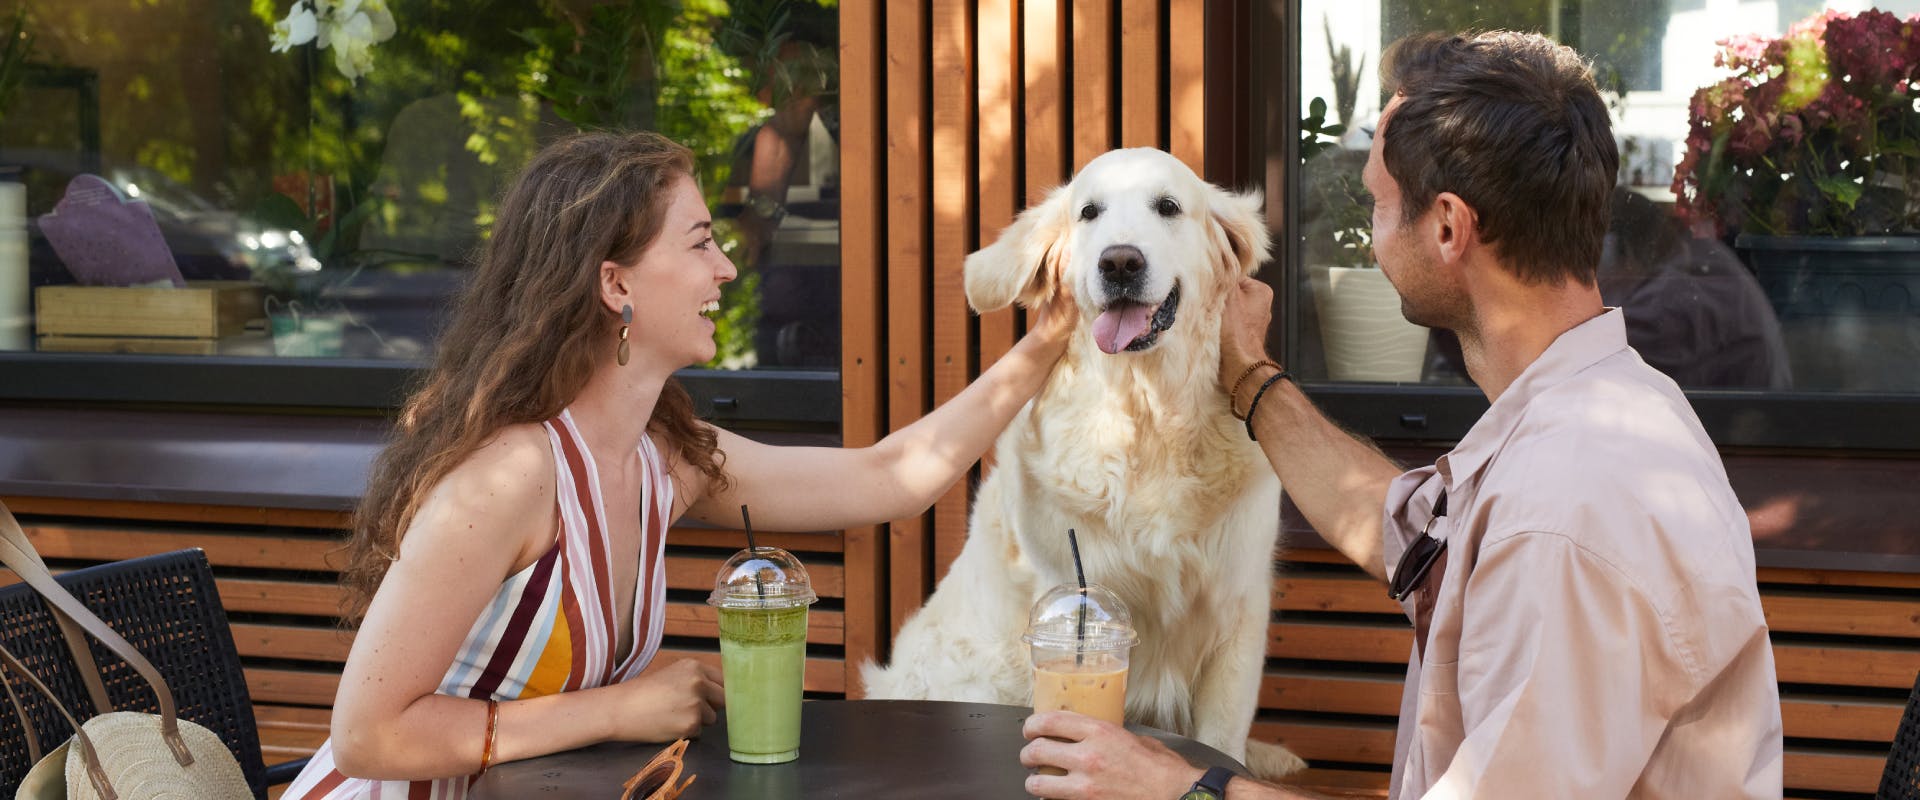 A couple sit at a cafe with a dog.